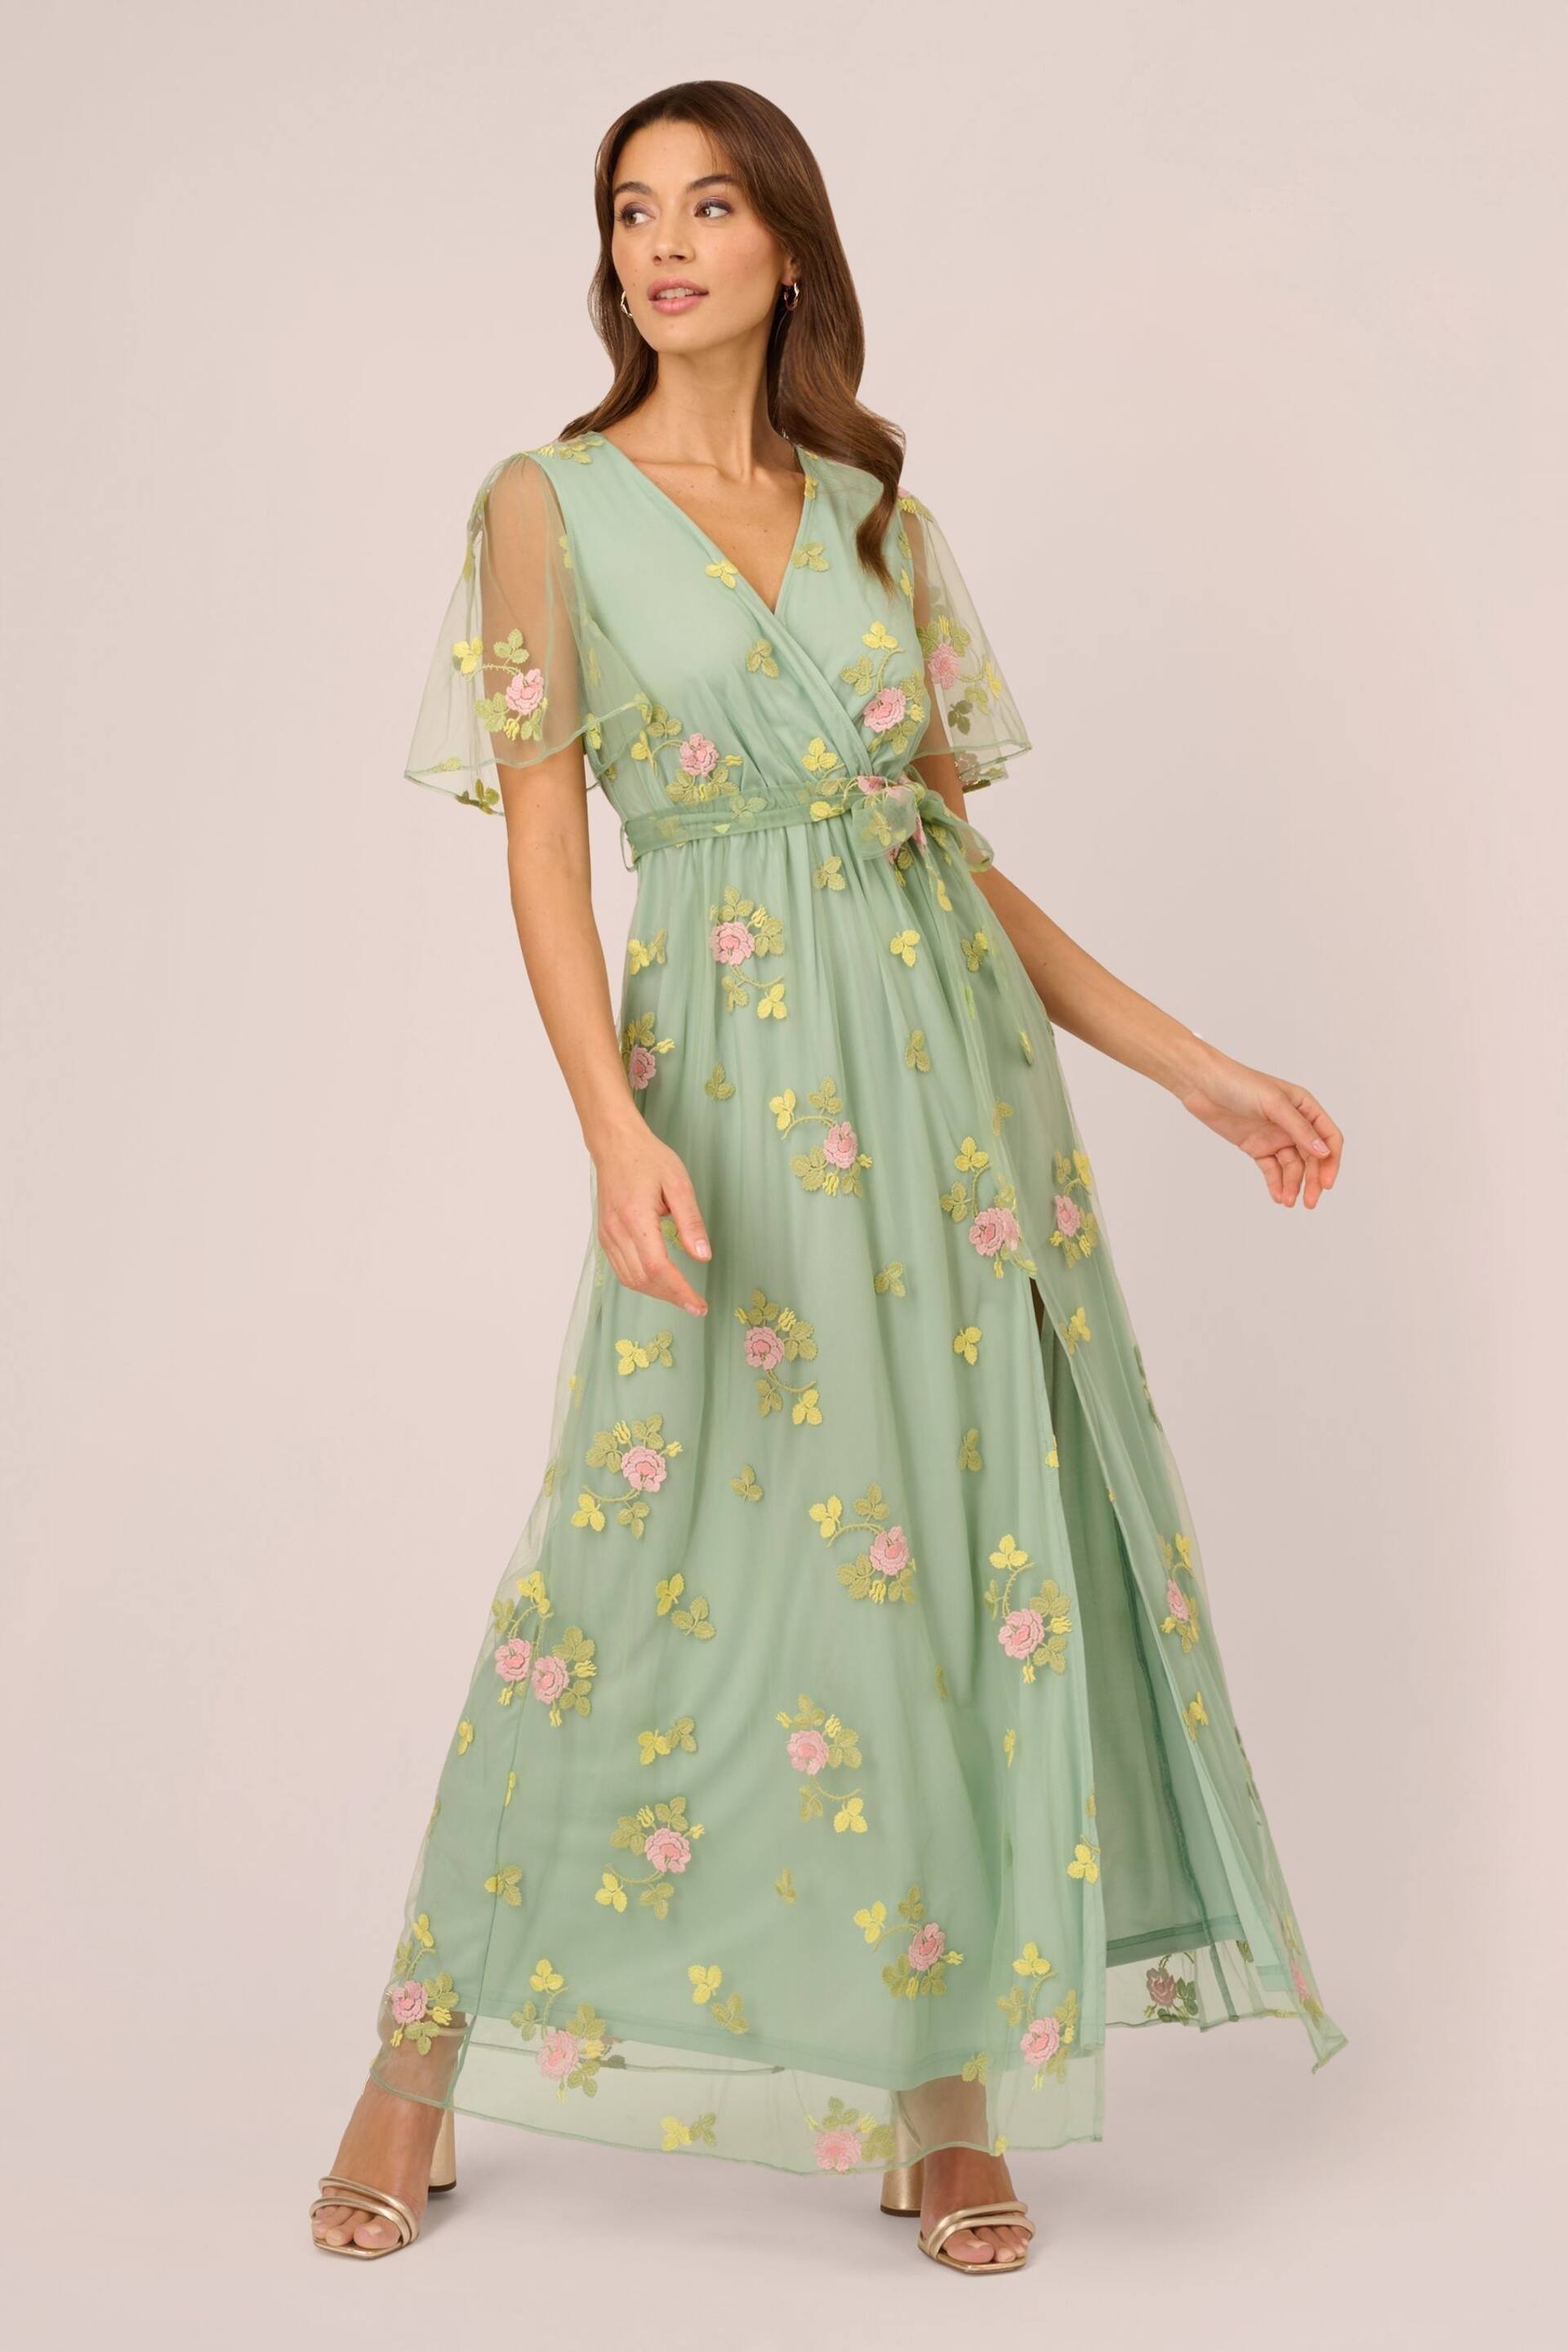 Adrianna Papell Green Embroidered Maxi Dress - Image 1 of 7